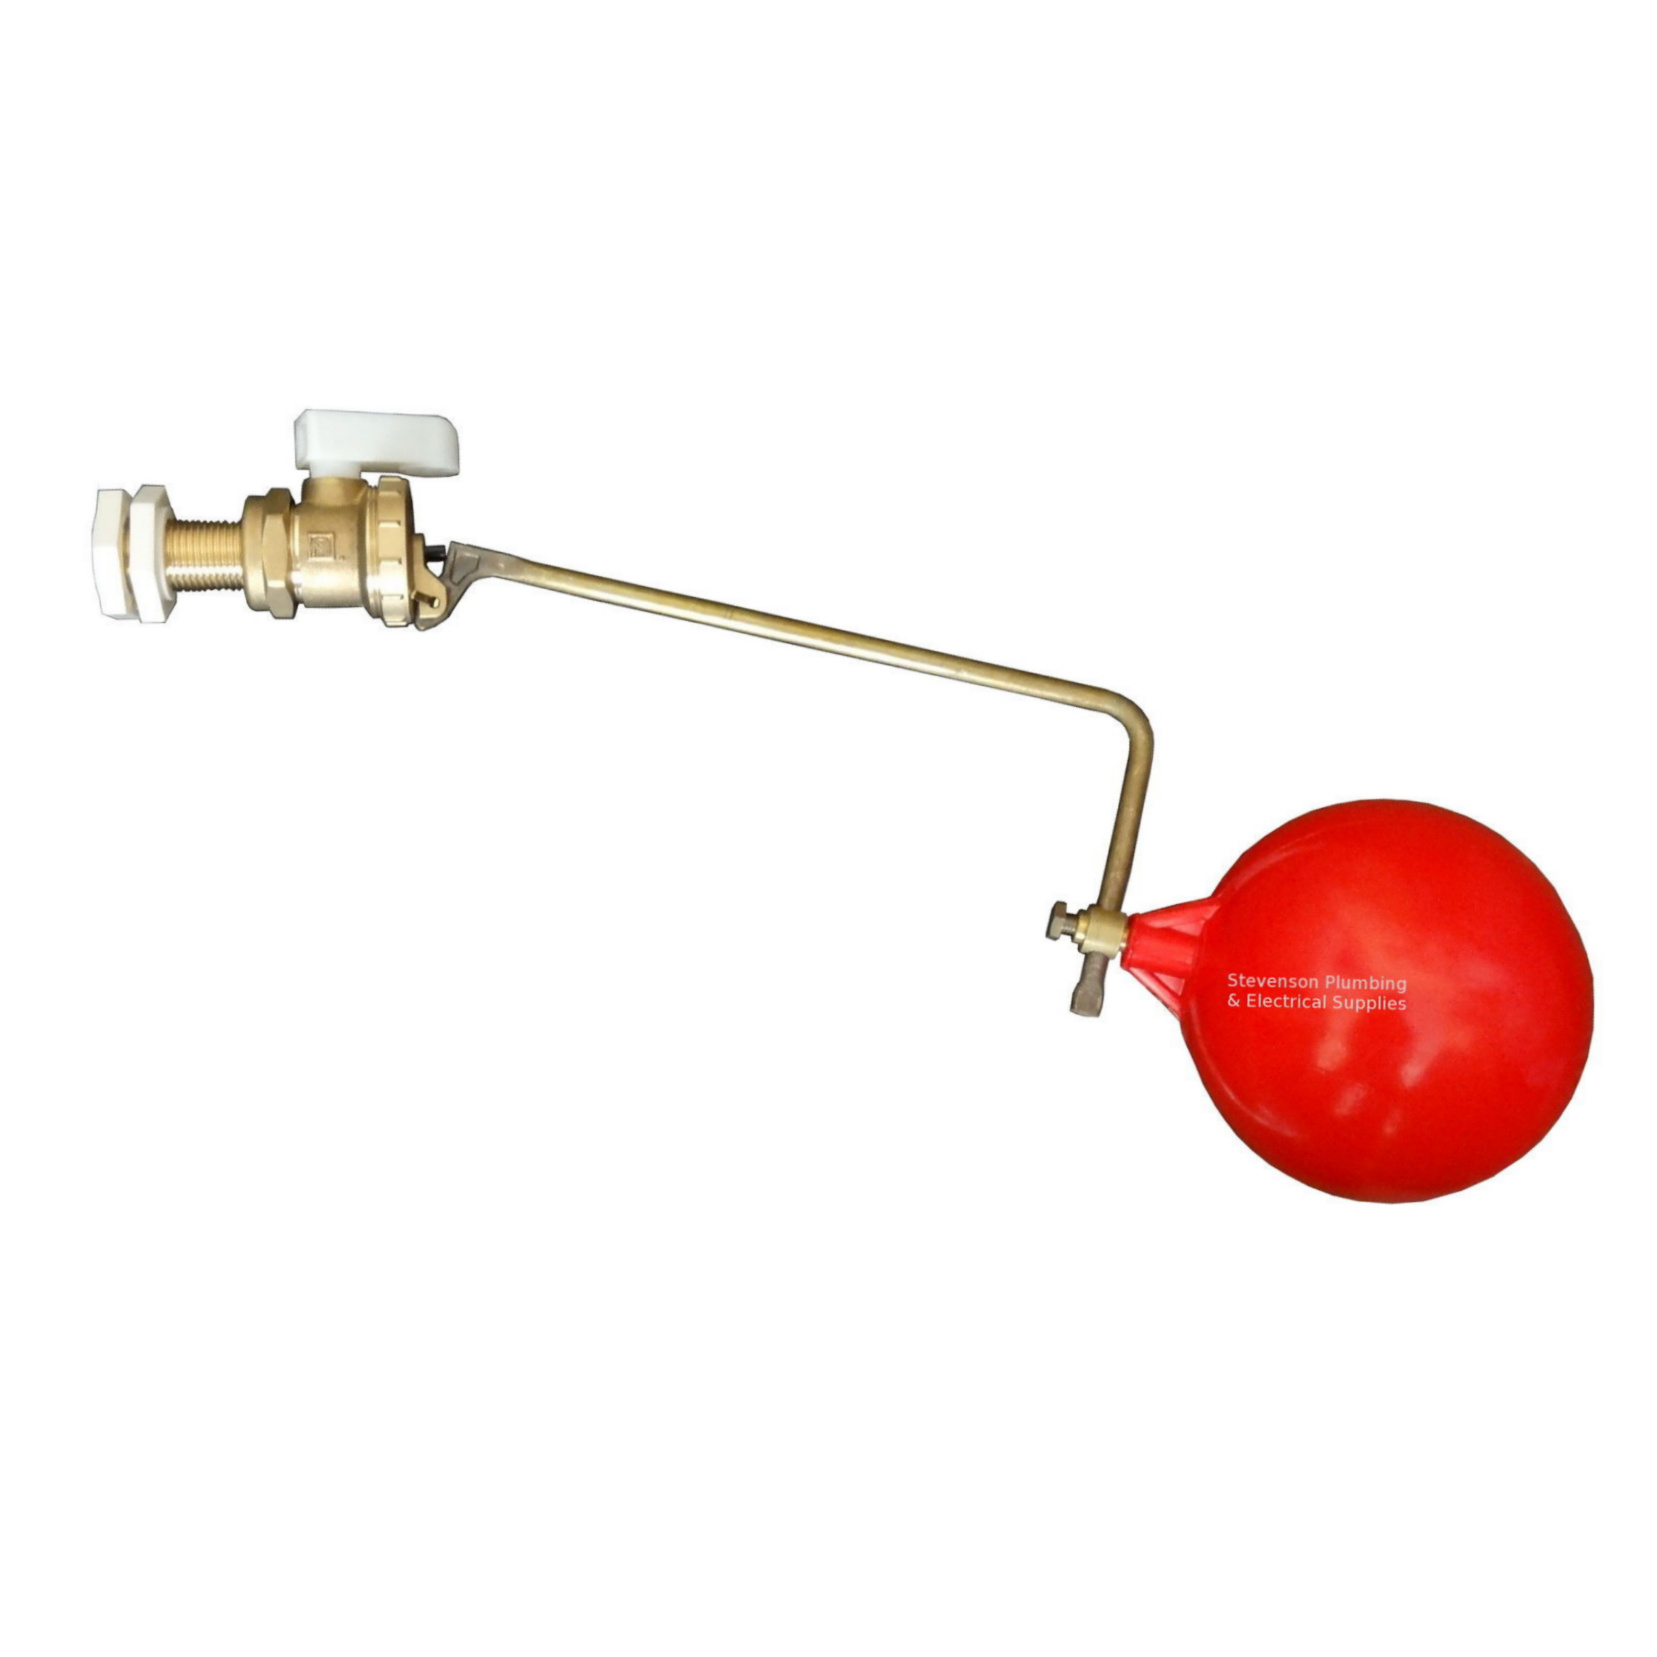 1/2 inch BS1212 Part 2 High Pressure Float Valve and Float